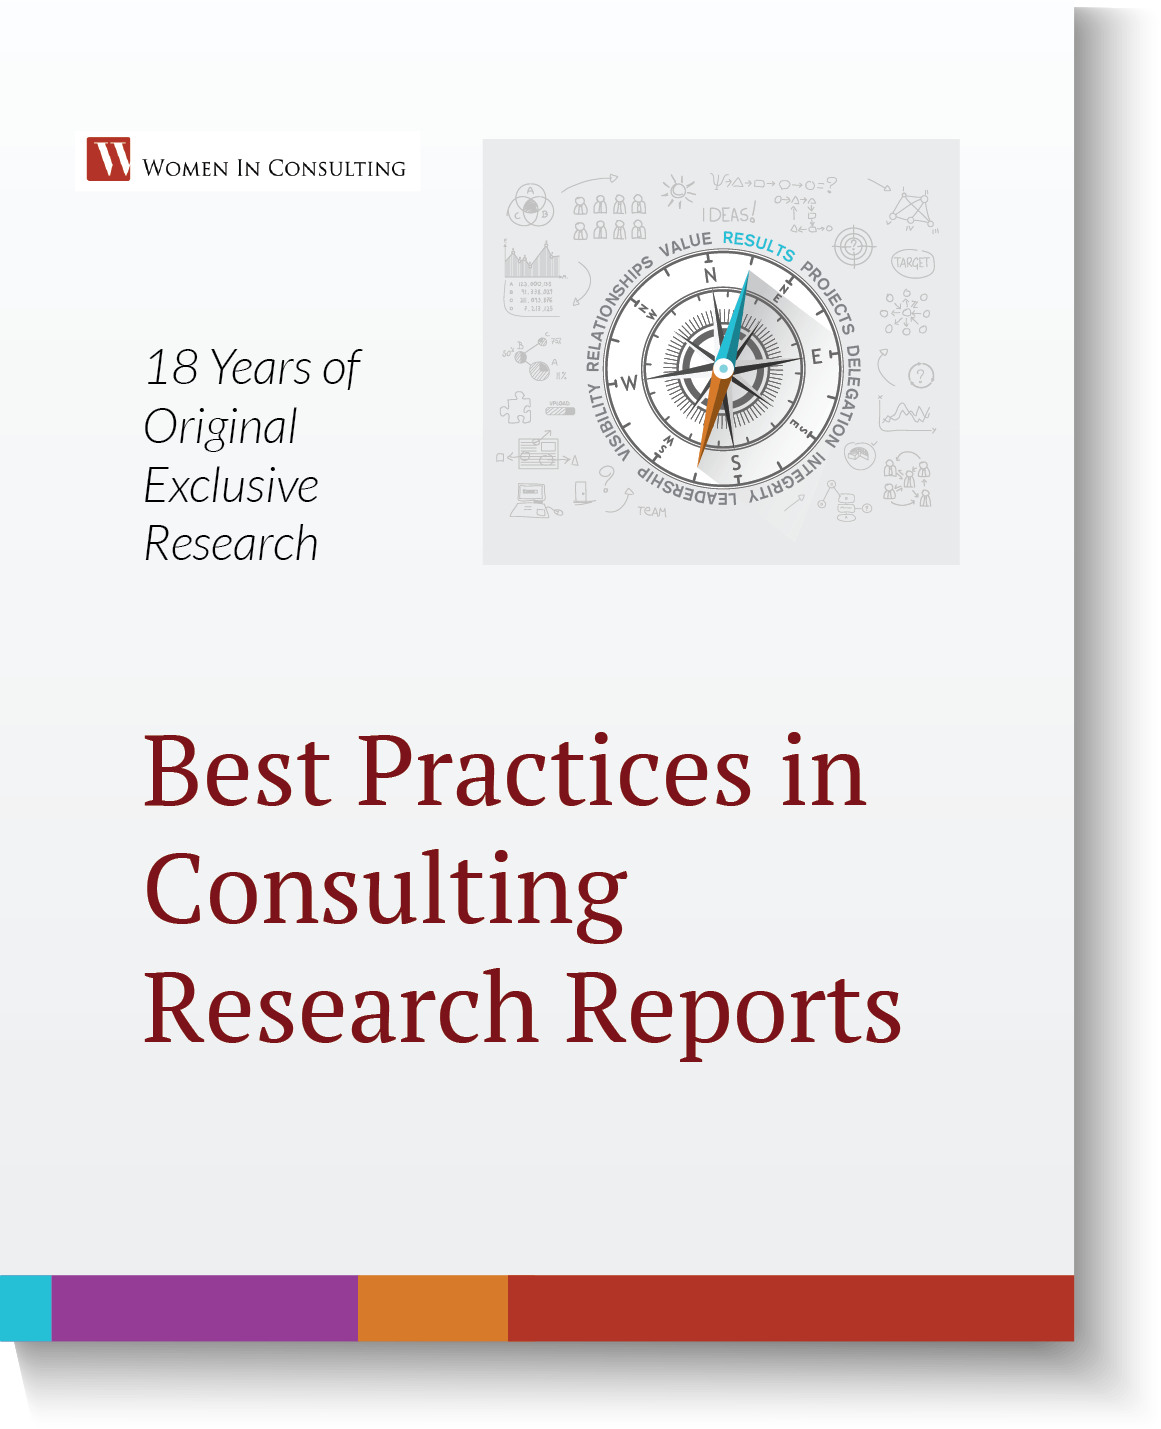 Best Practices in Consulting Research Reports